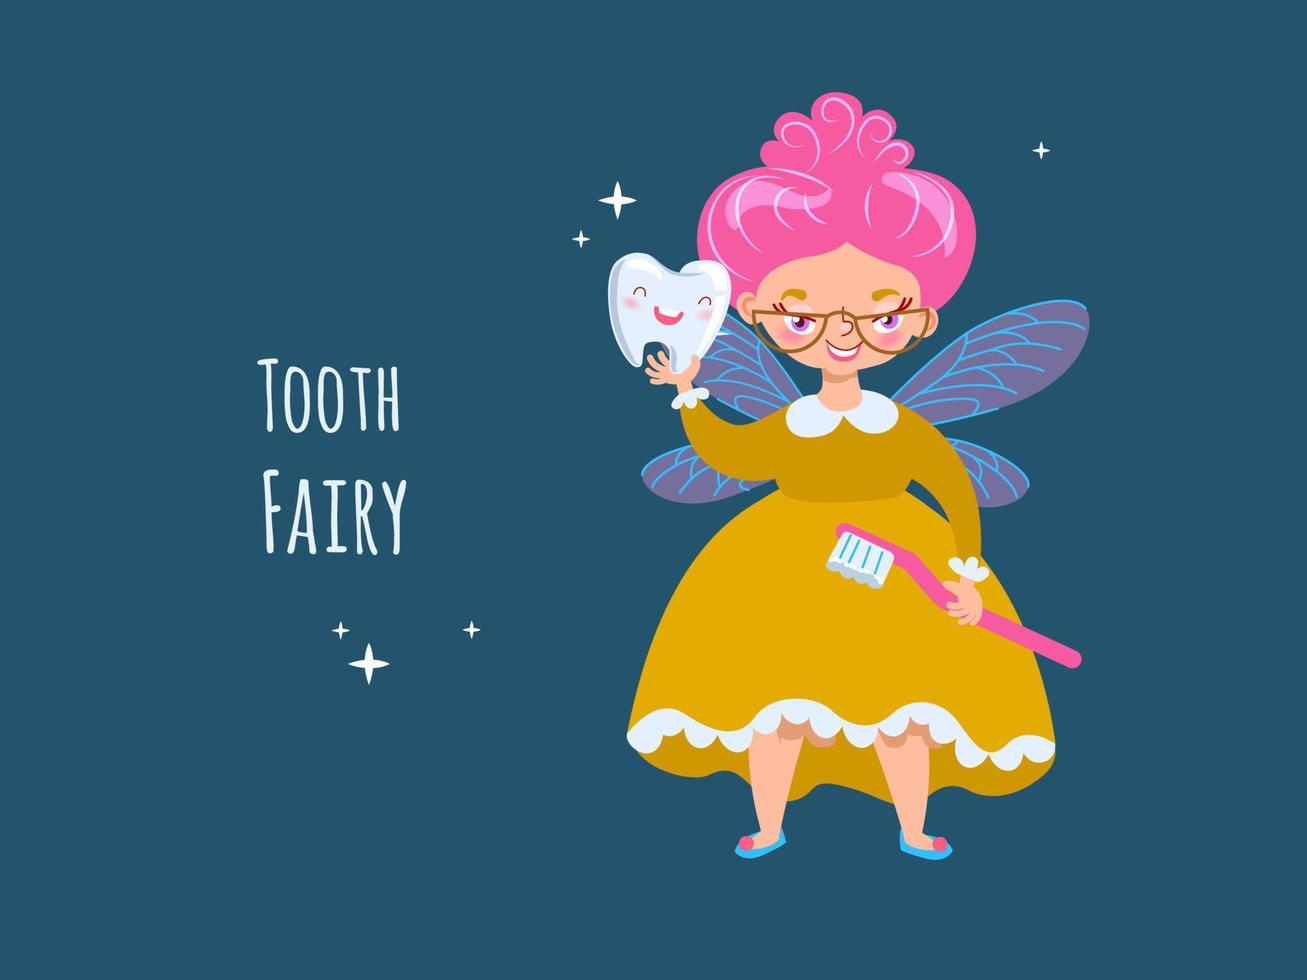 Cute tooth fairy with baby tooth, fairy in glasses with green hair, cartoon character in pink dress with wings vector illustration